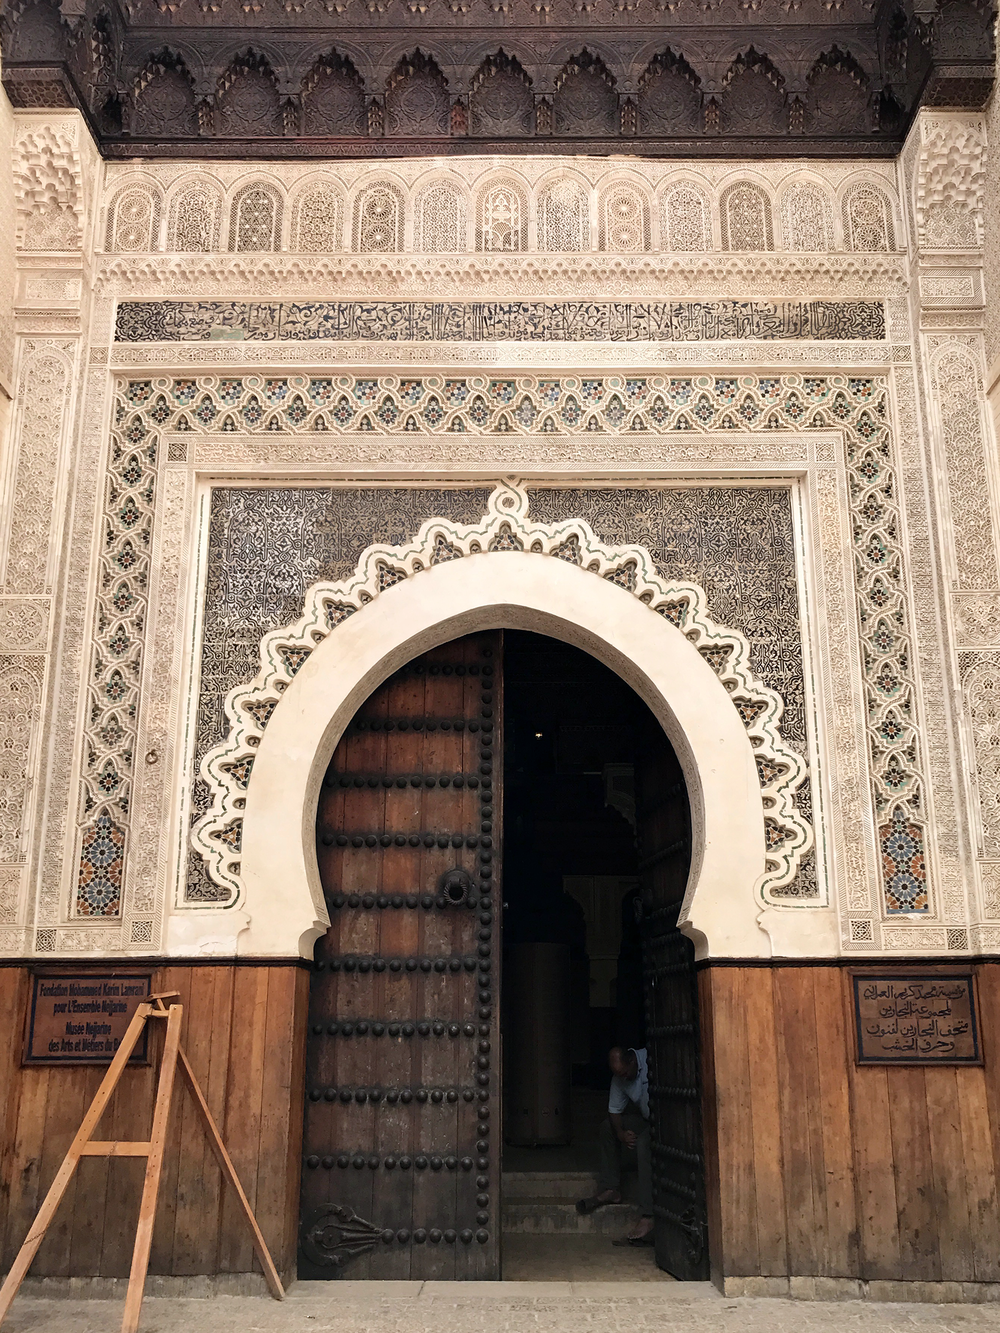 Woodworking Museum Entrance in Fez Morocco | Photos of Morocco